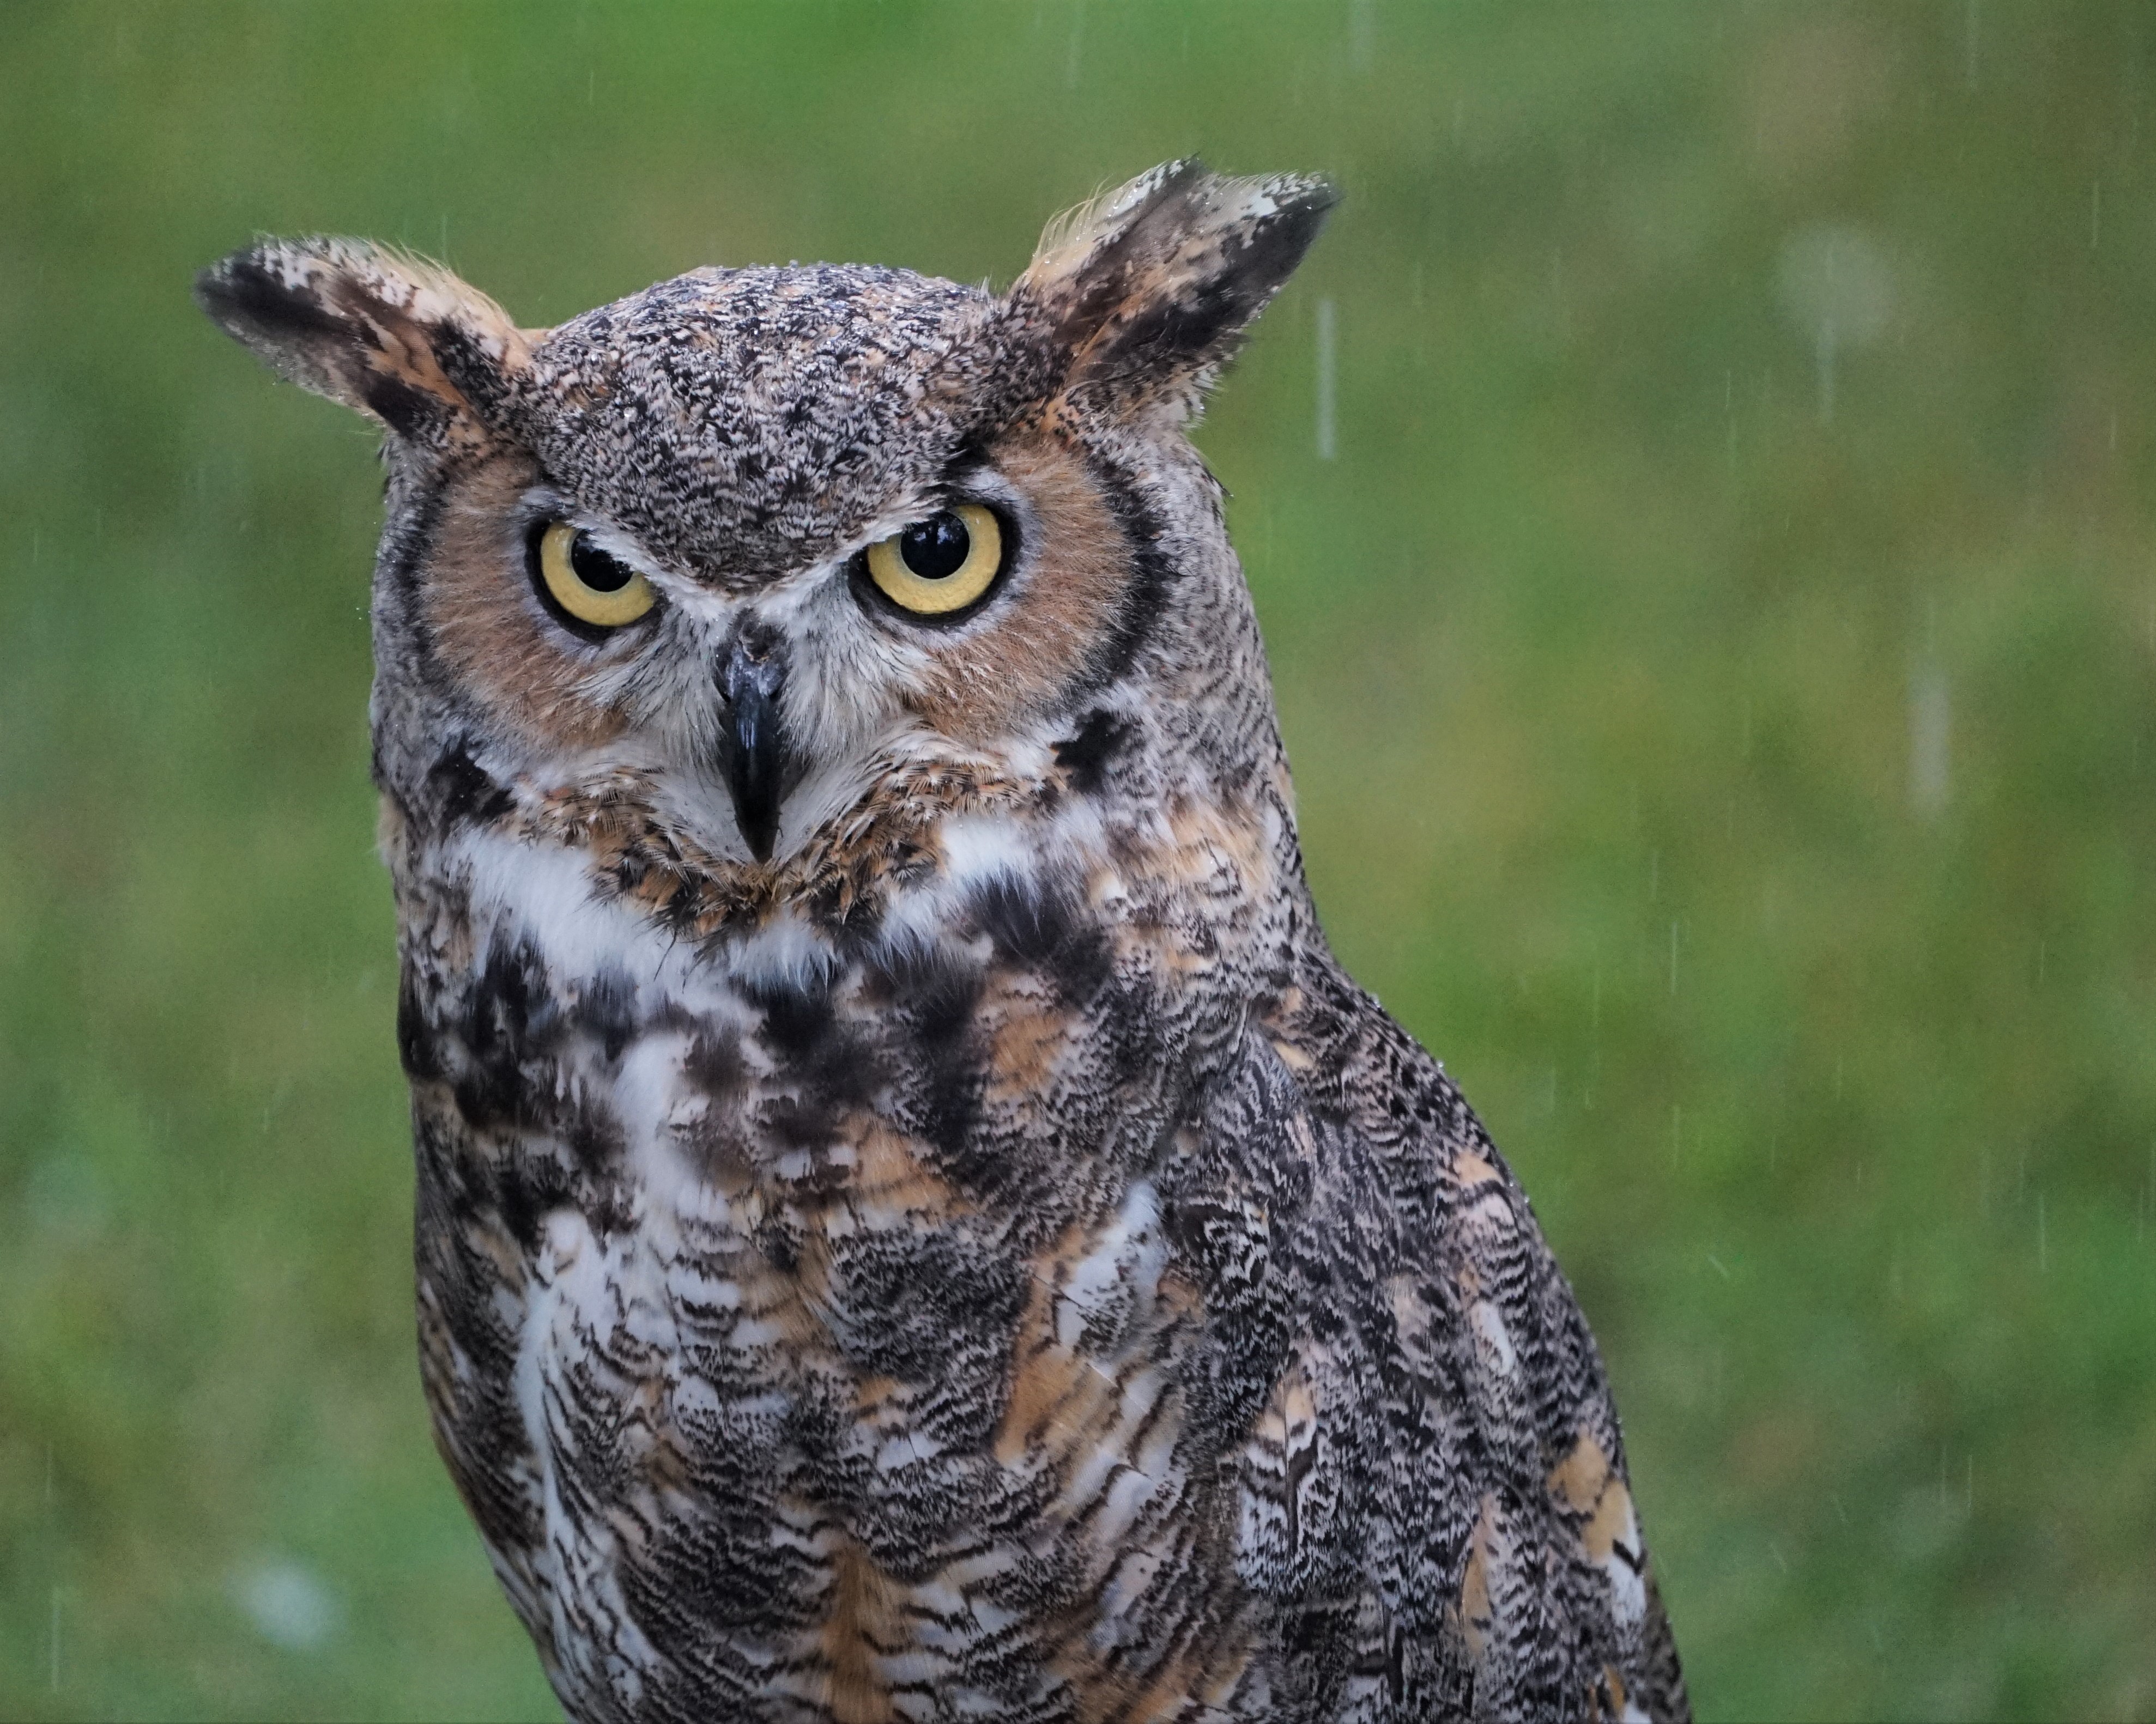 Lois, a great horned owl, in the rain